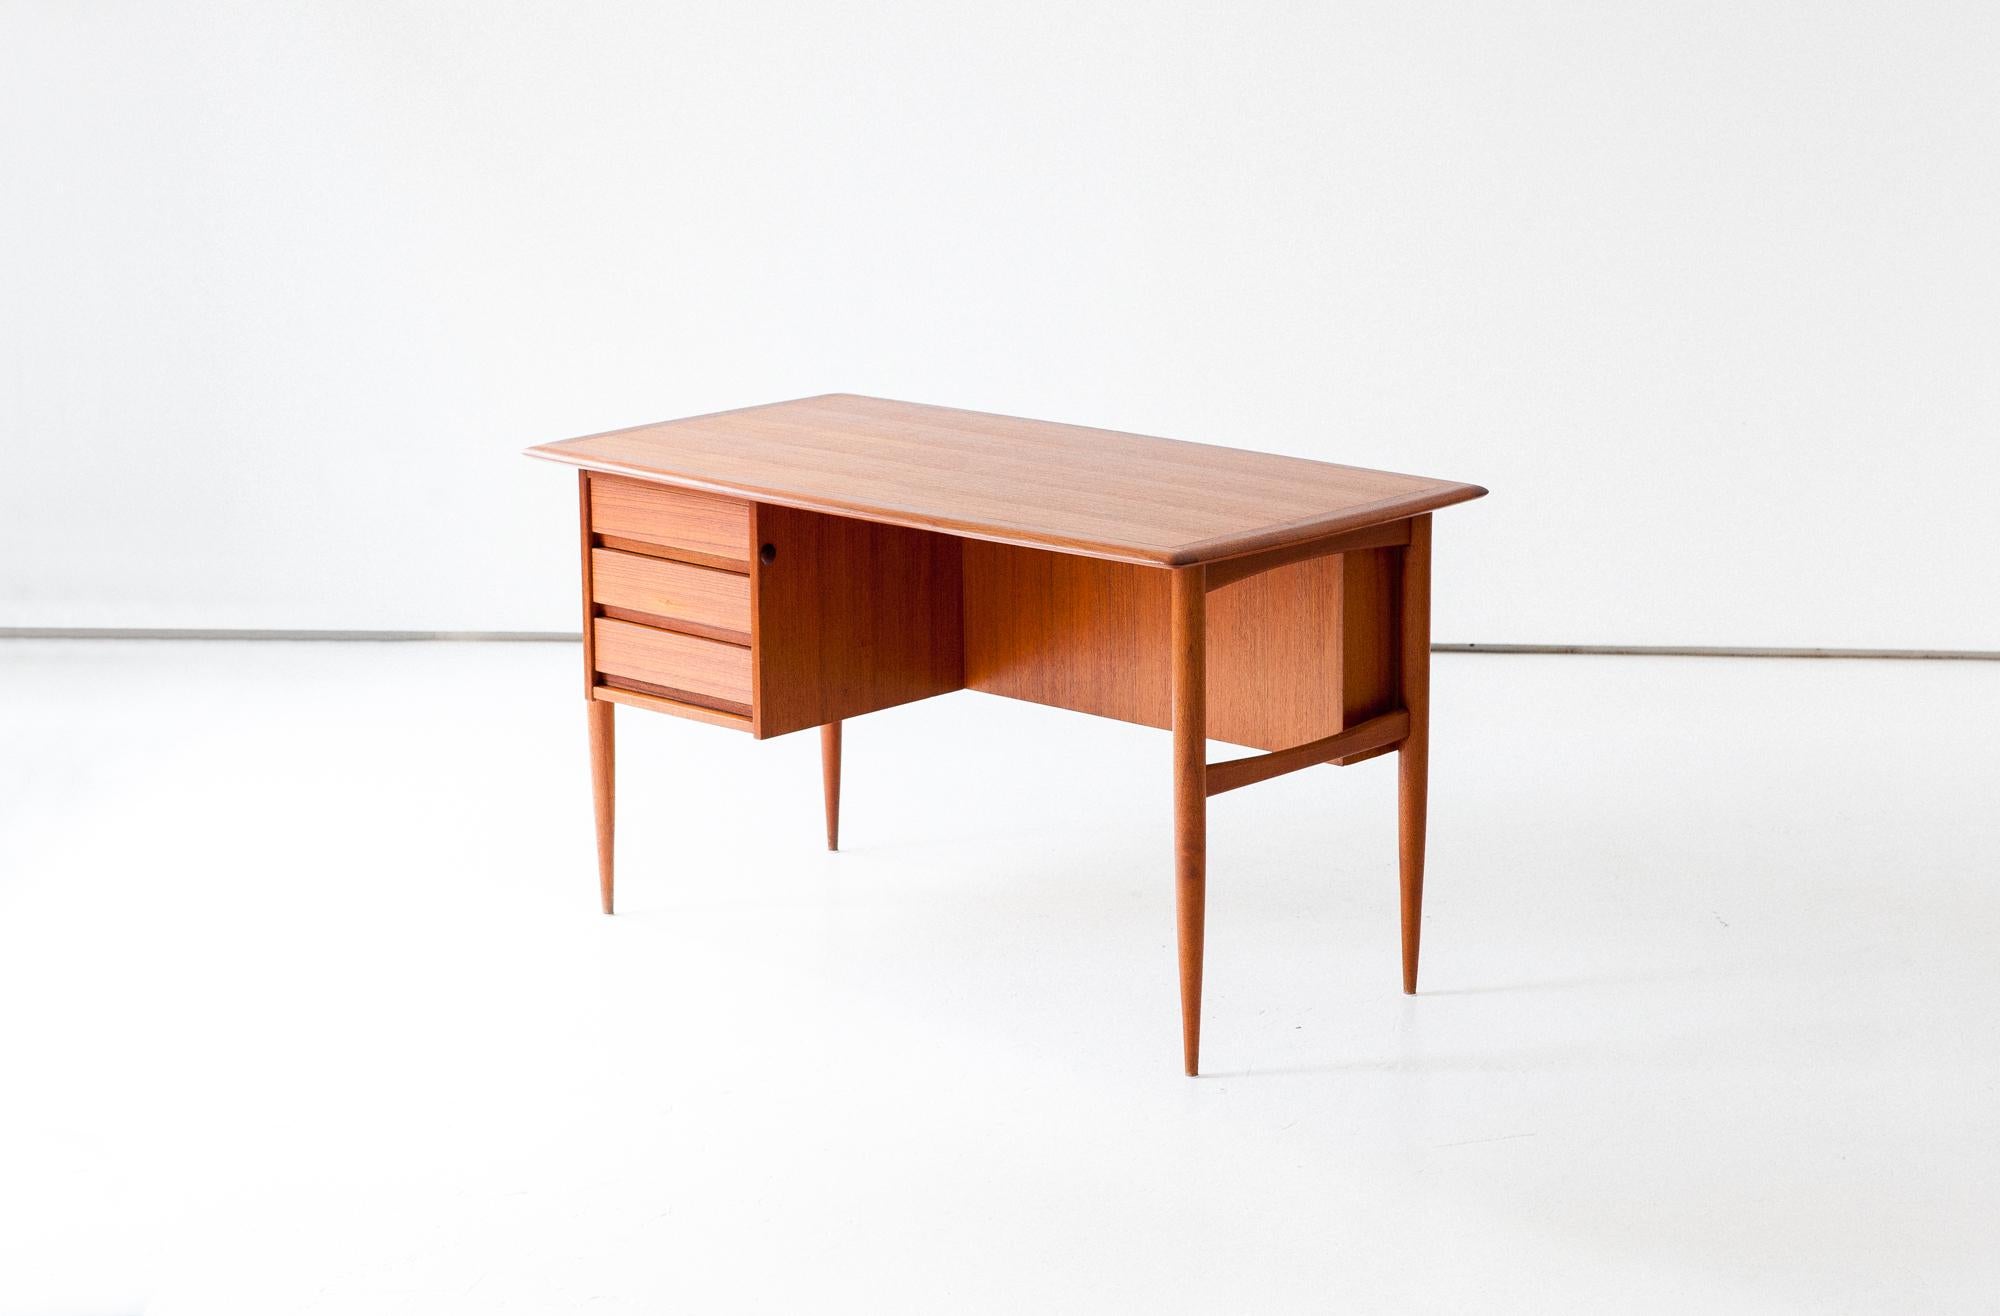 A scandinavian modern table with chest of drawers manufactured in Denmark in the 1950s
It feature an open bookcase in the back and three drawers on the front
This writing tables in made of teak wood
Completely restored, there are only original